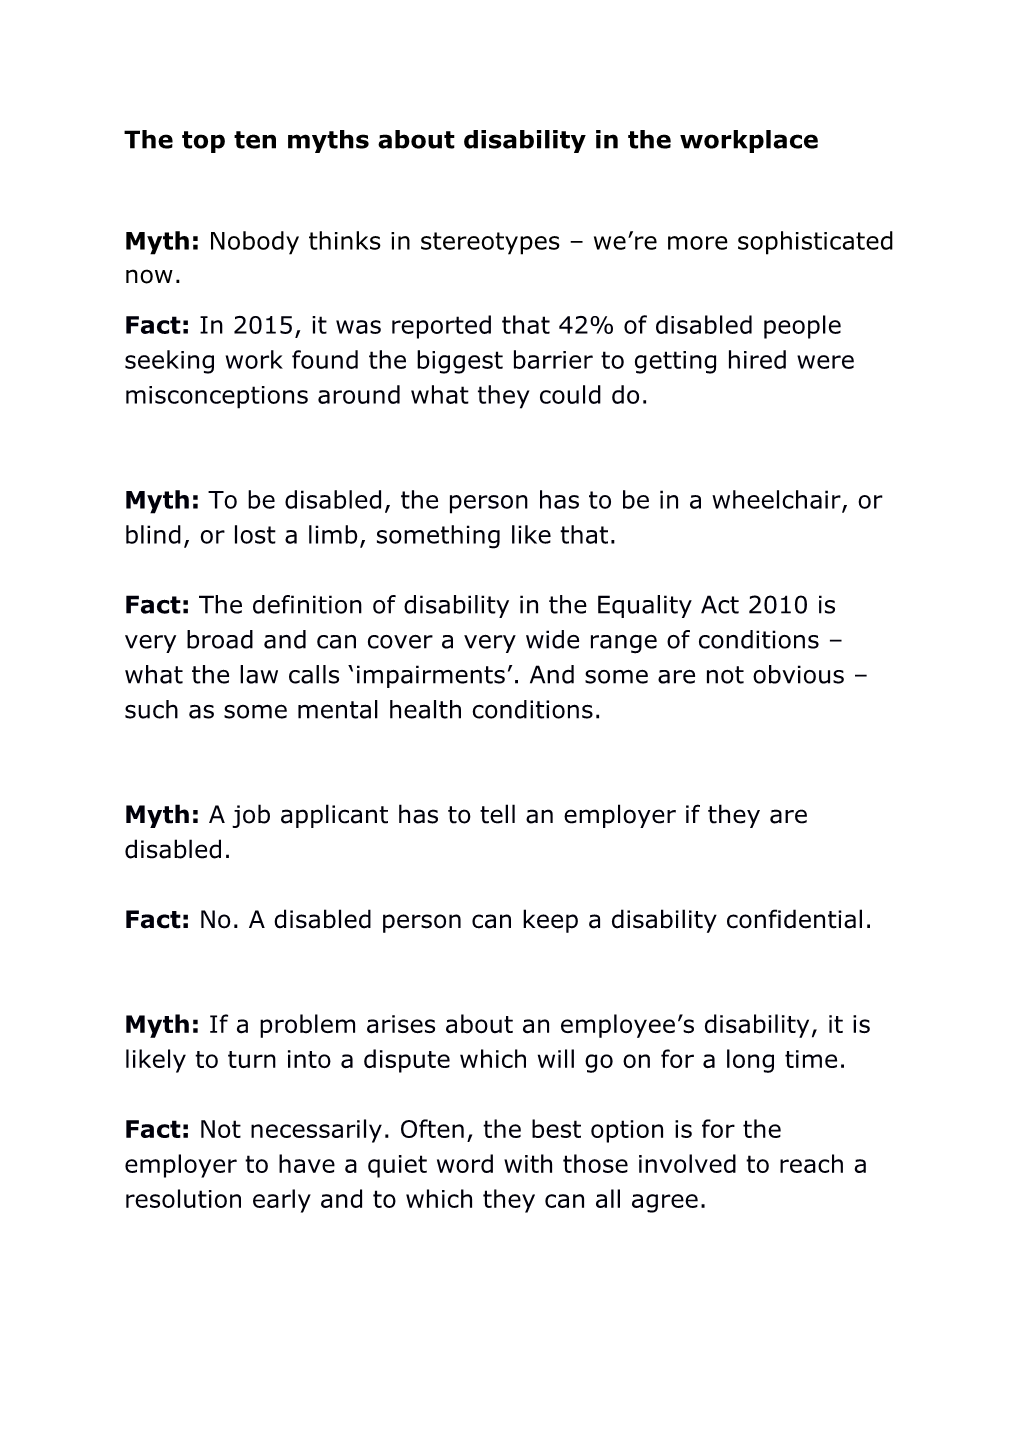 The Top Ten Myths About Disability in the Workplace